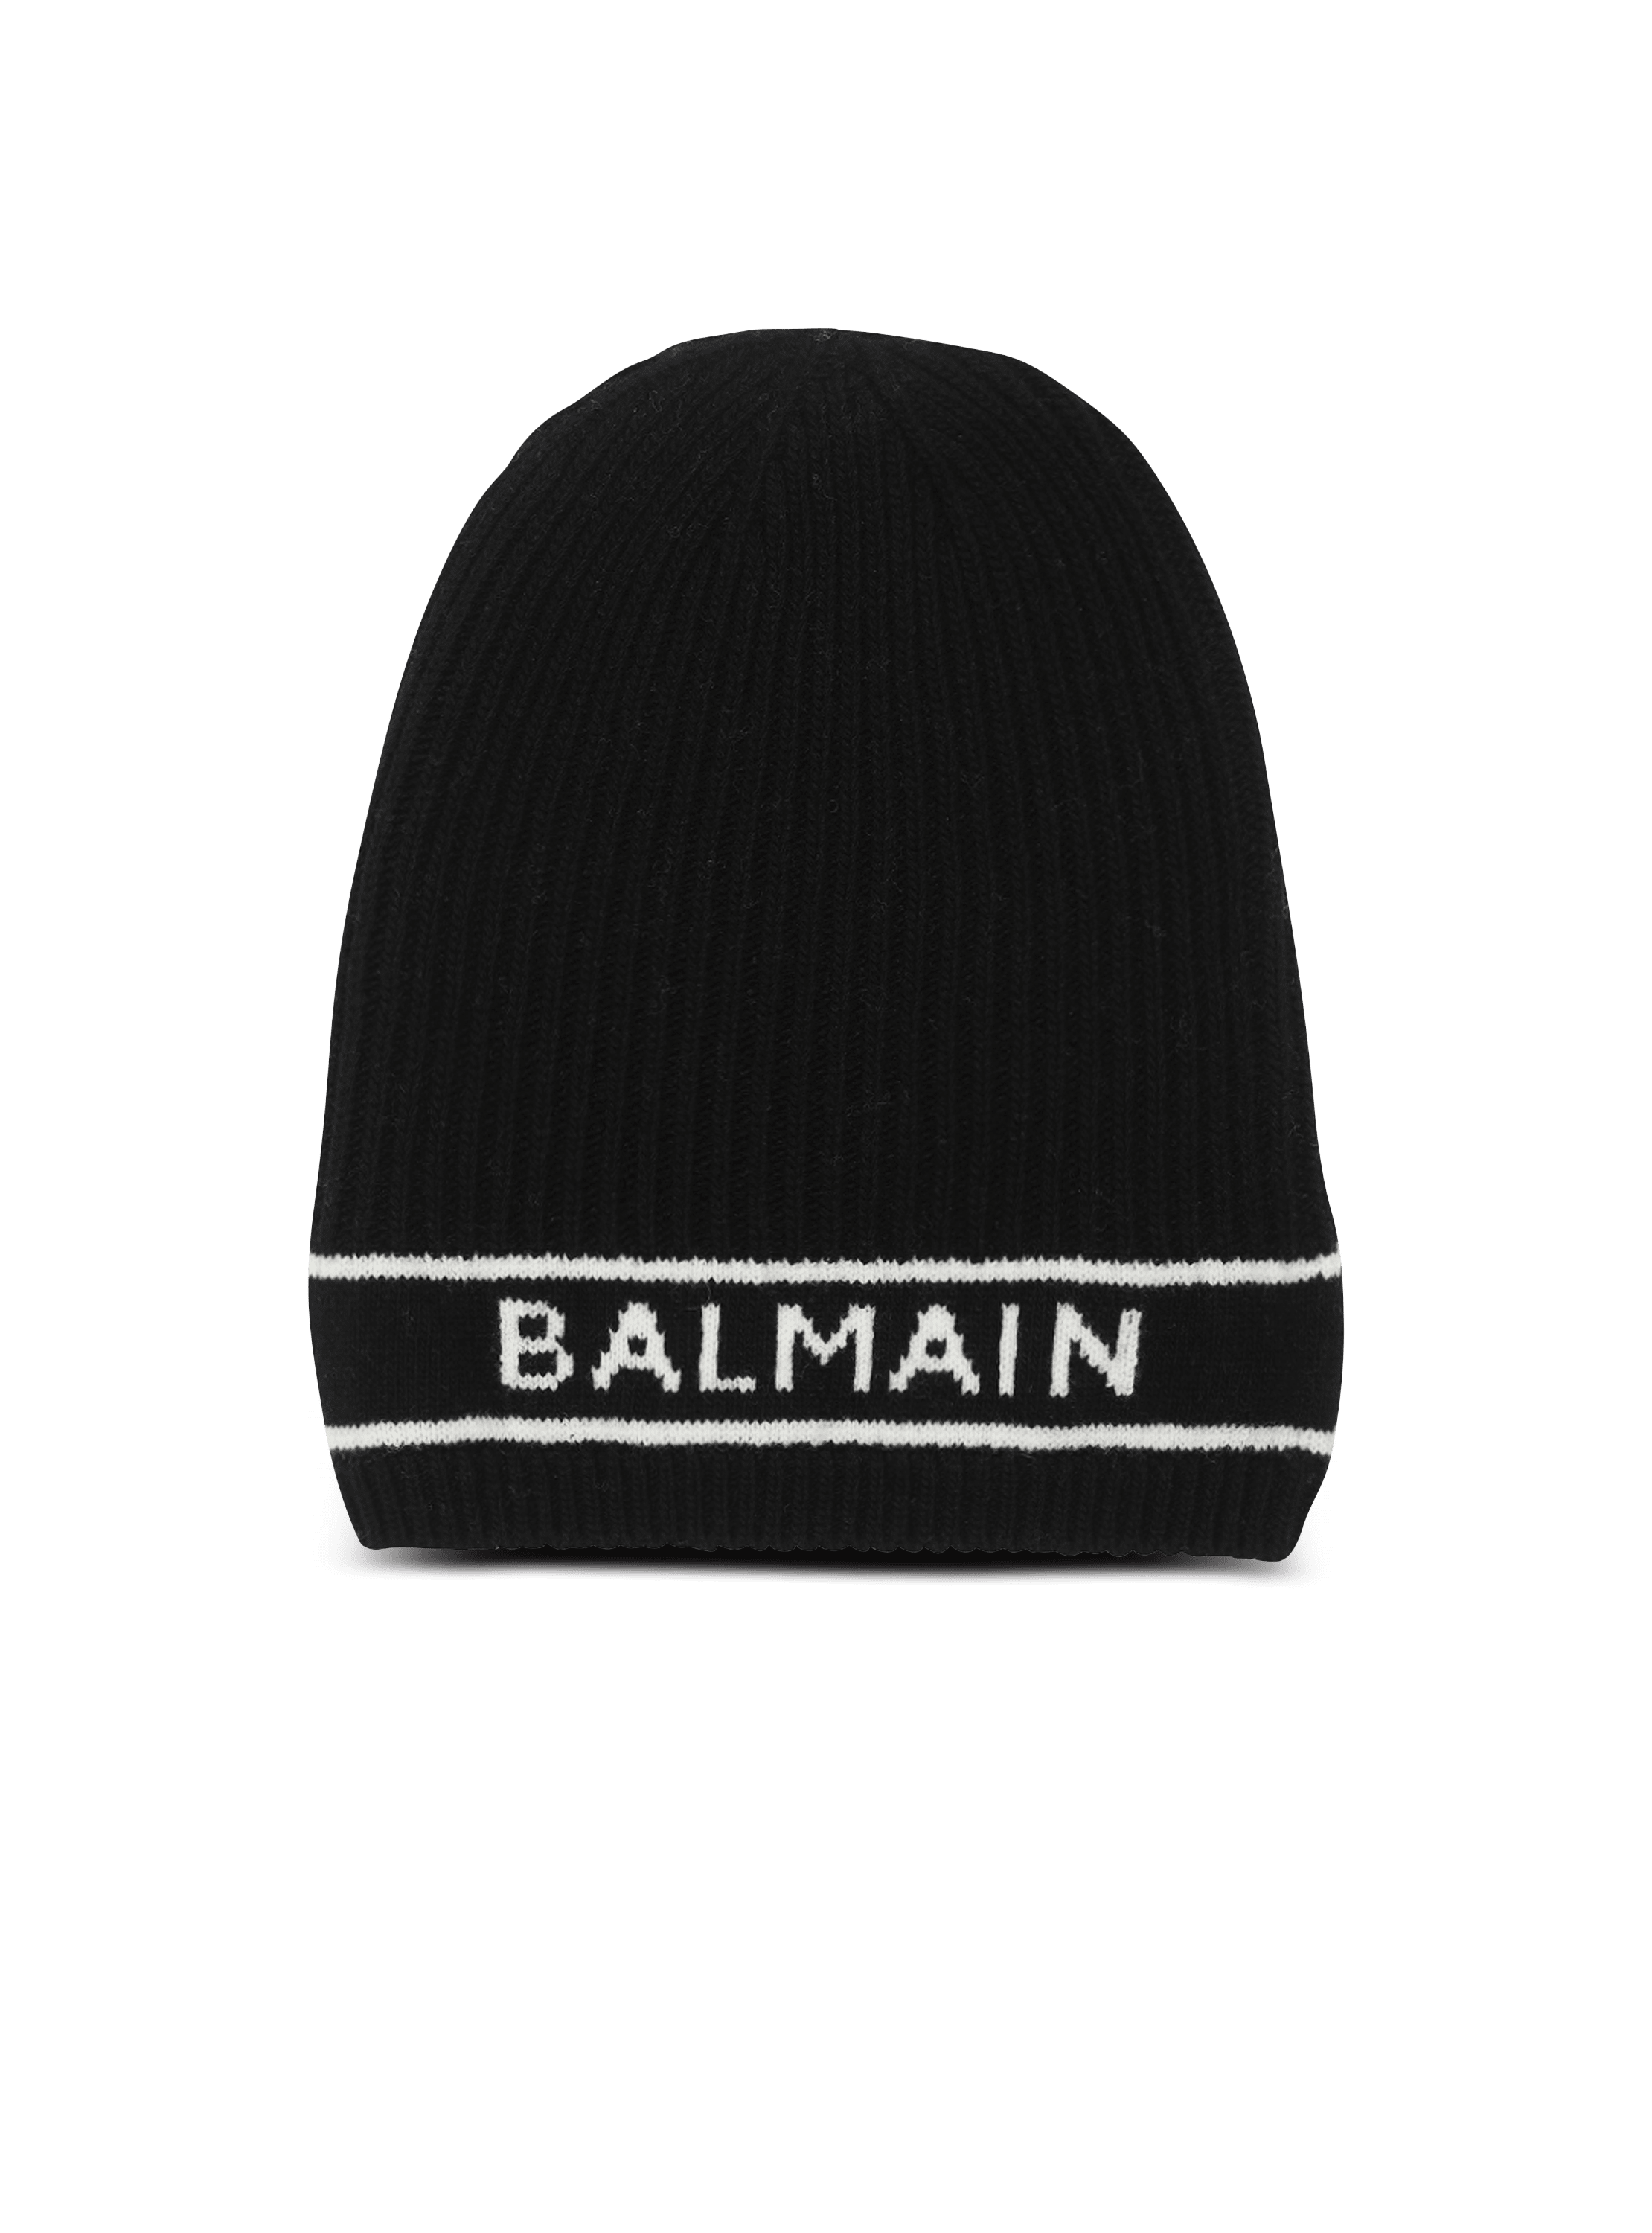 Wool beanie with embroidered Balmain logo